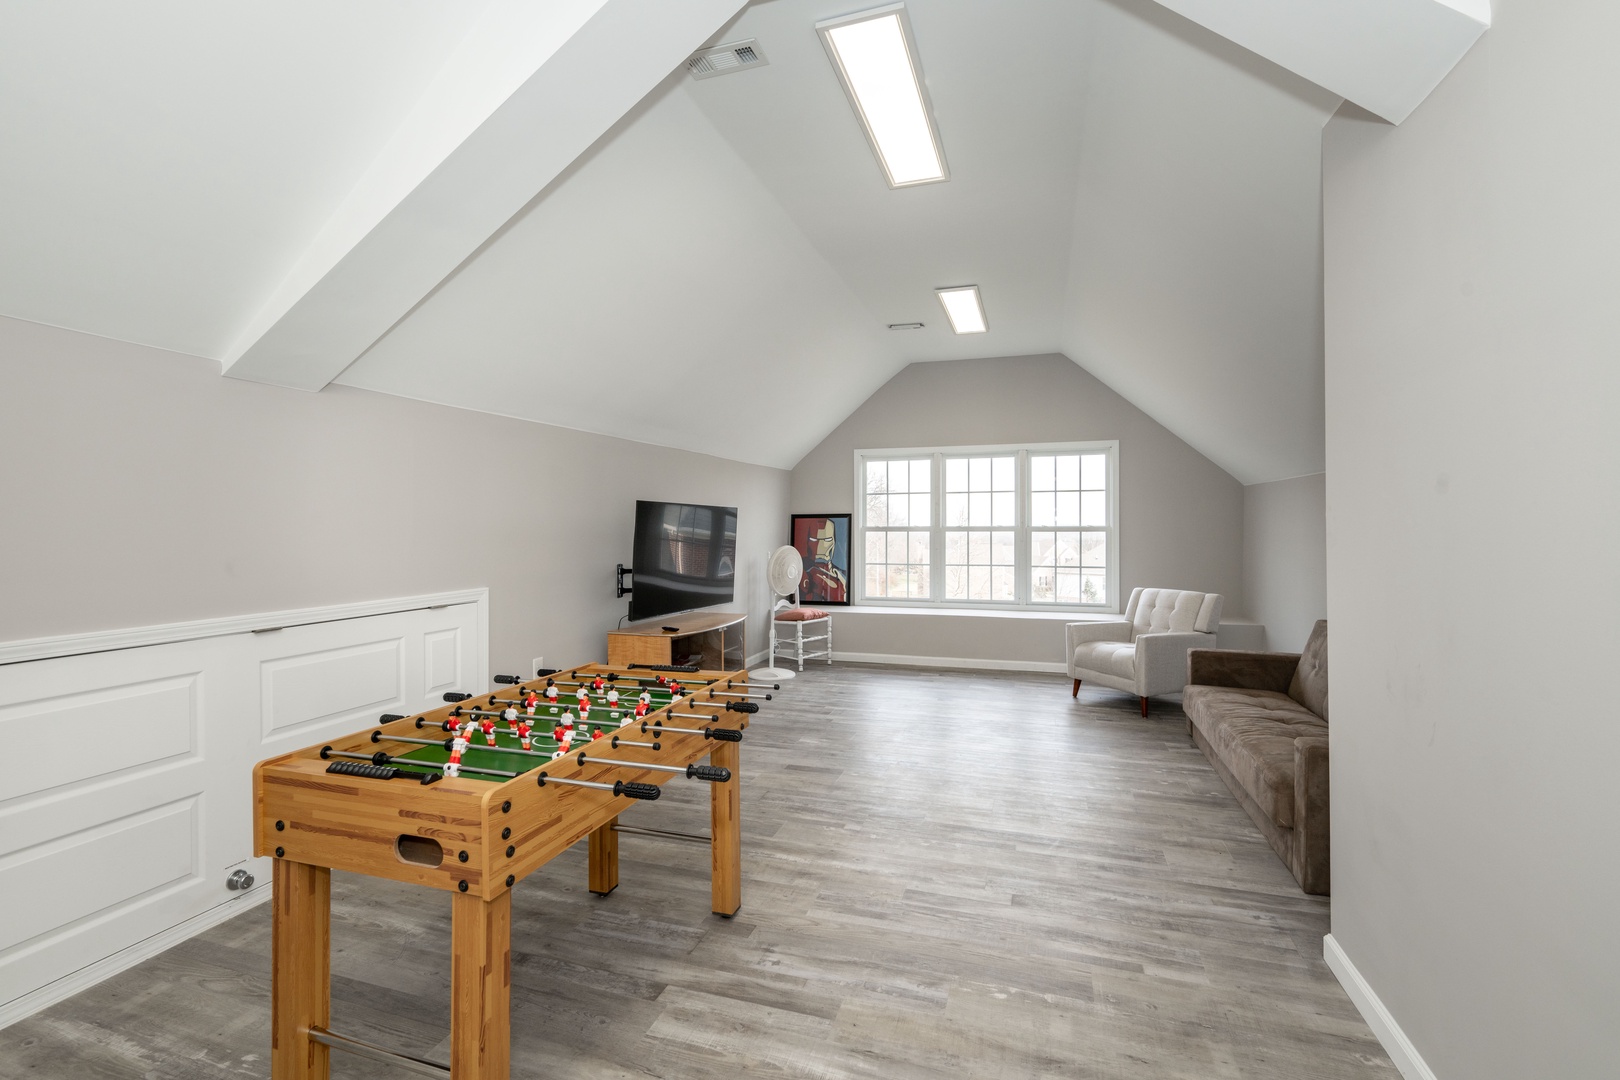 Game room with foosball, board games, Smart TV, and seating area